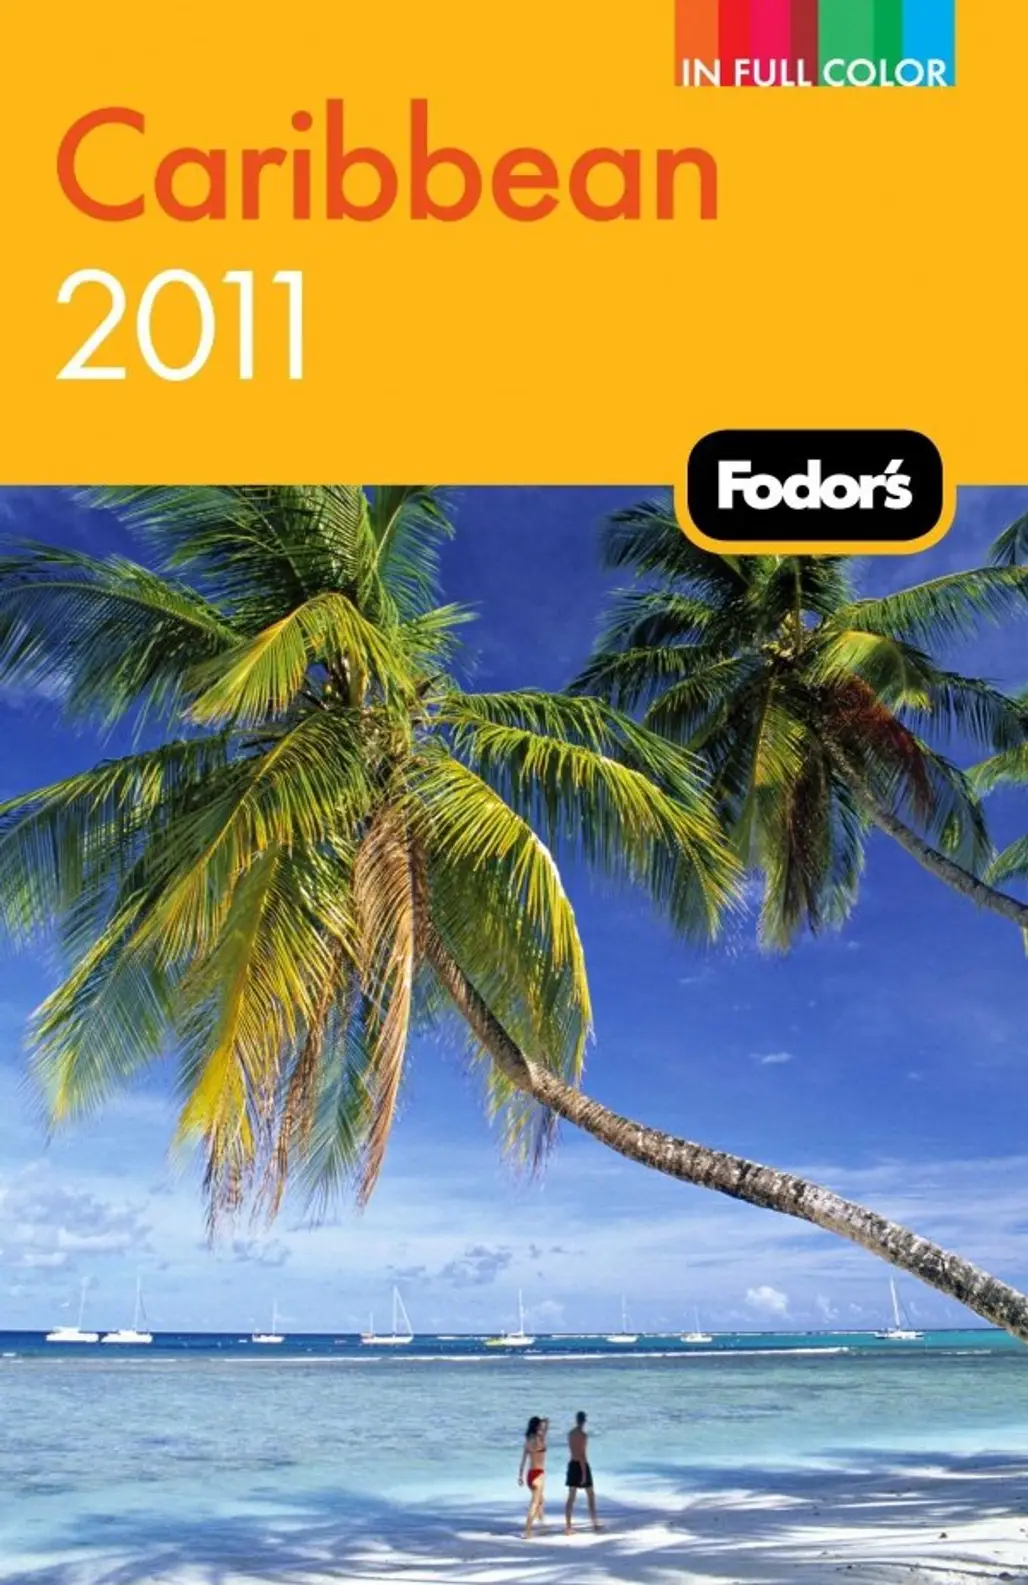 Fodor’s Travel Guides